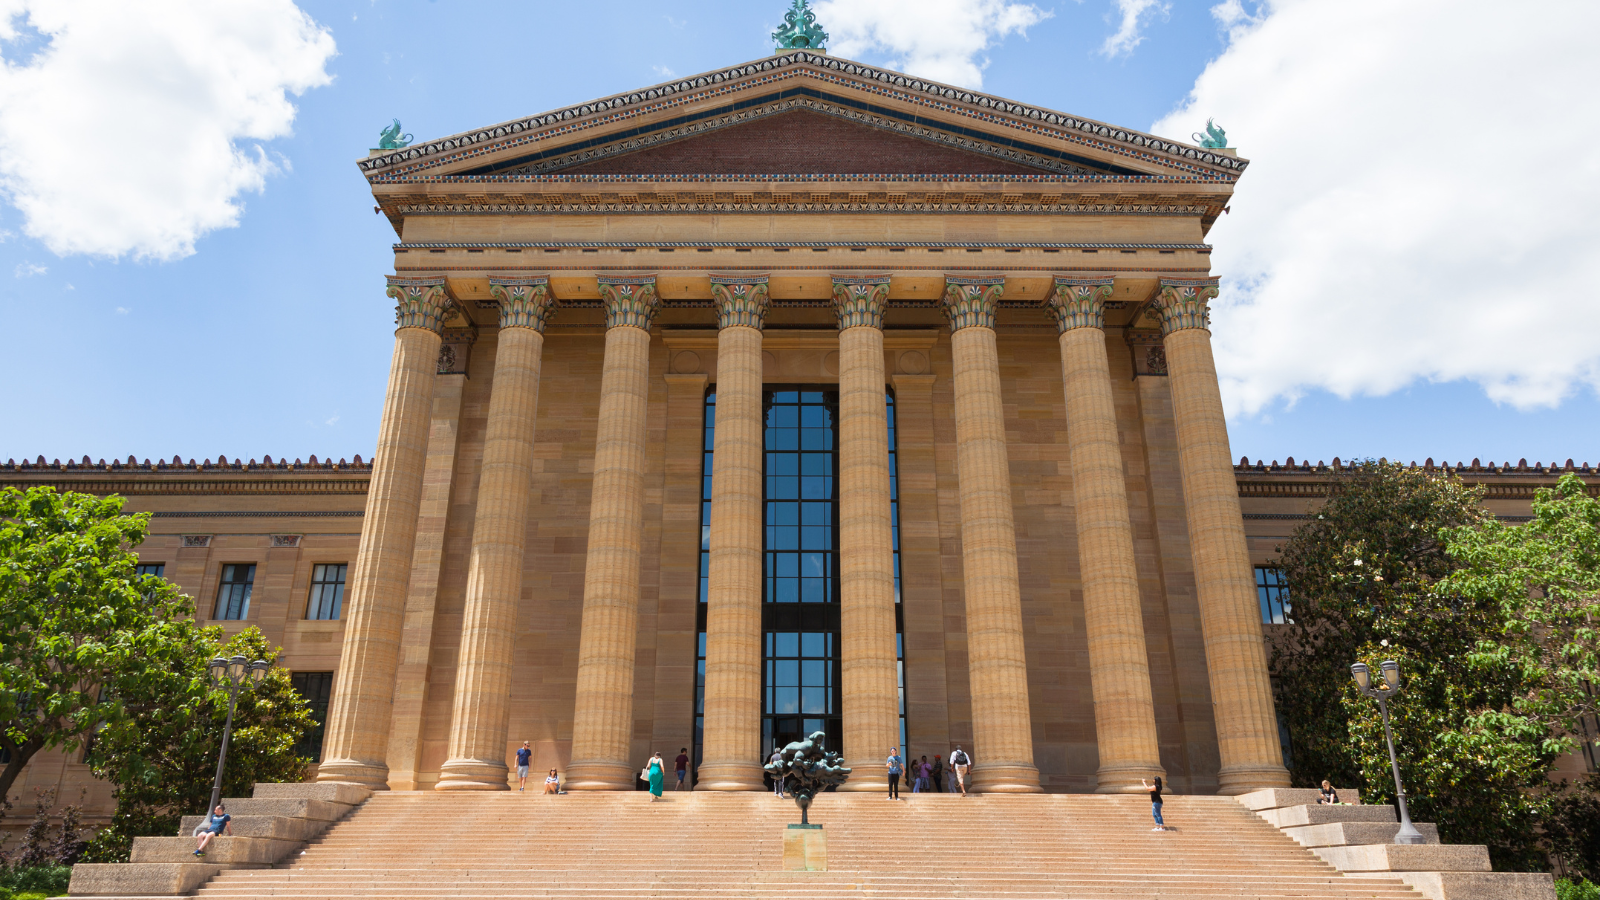 Experience the impressive collections at the Philadelphia Art Museum.